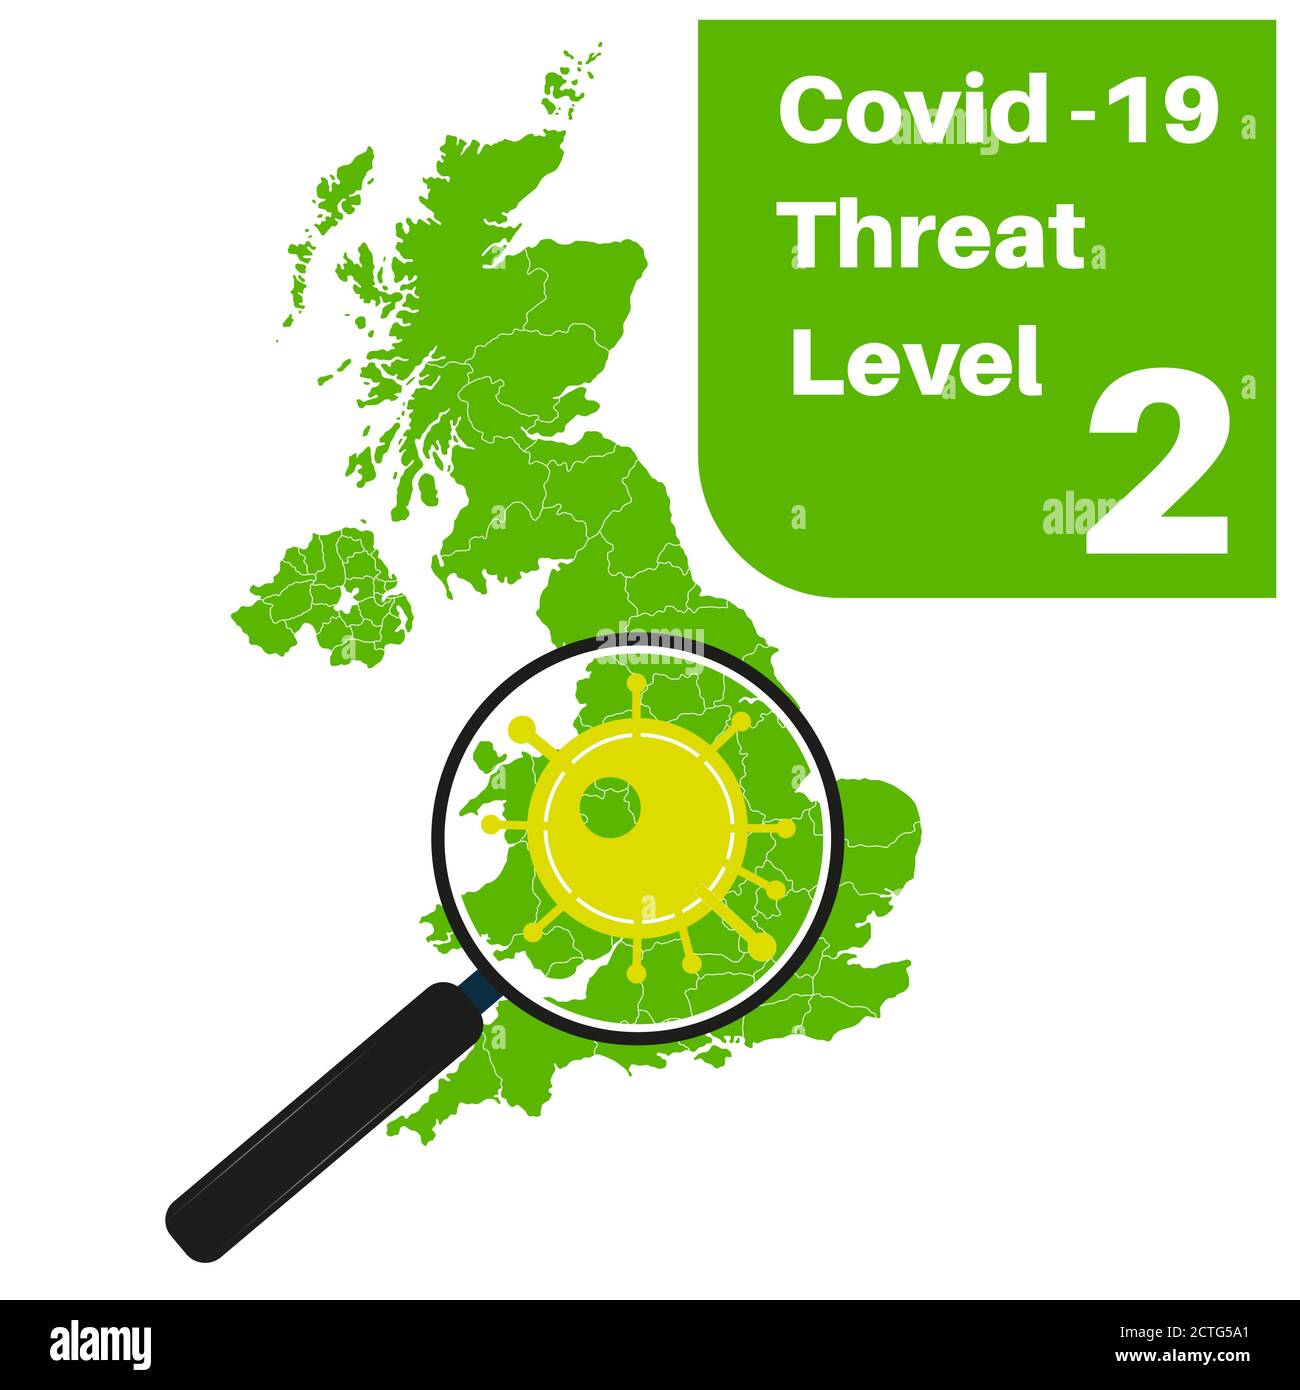 Covid-19 UK Threat Level 2 (Green) with map and magnifying glass Stock Vector